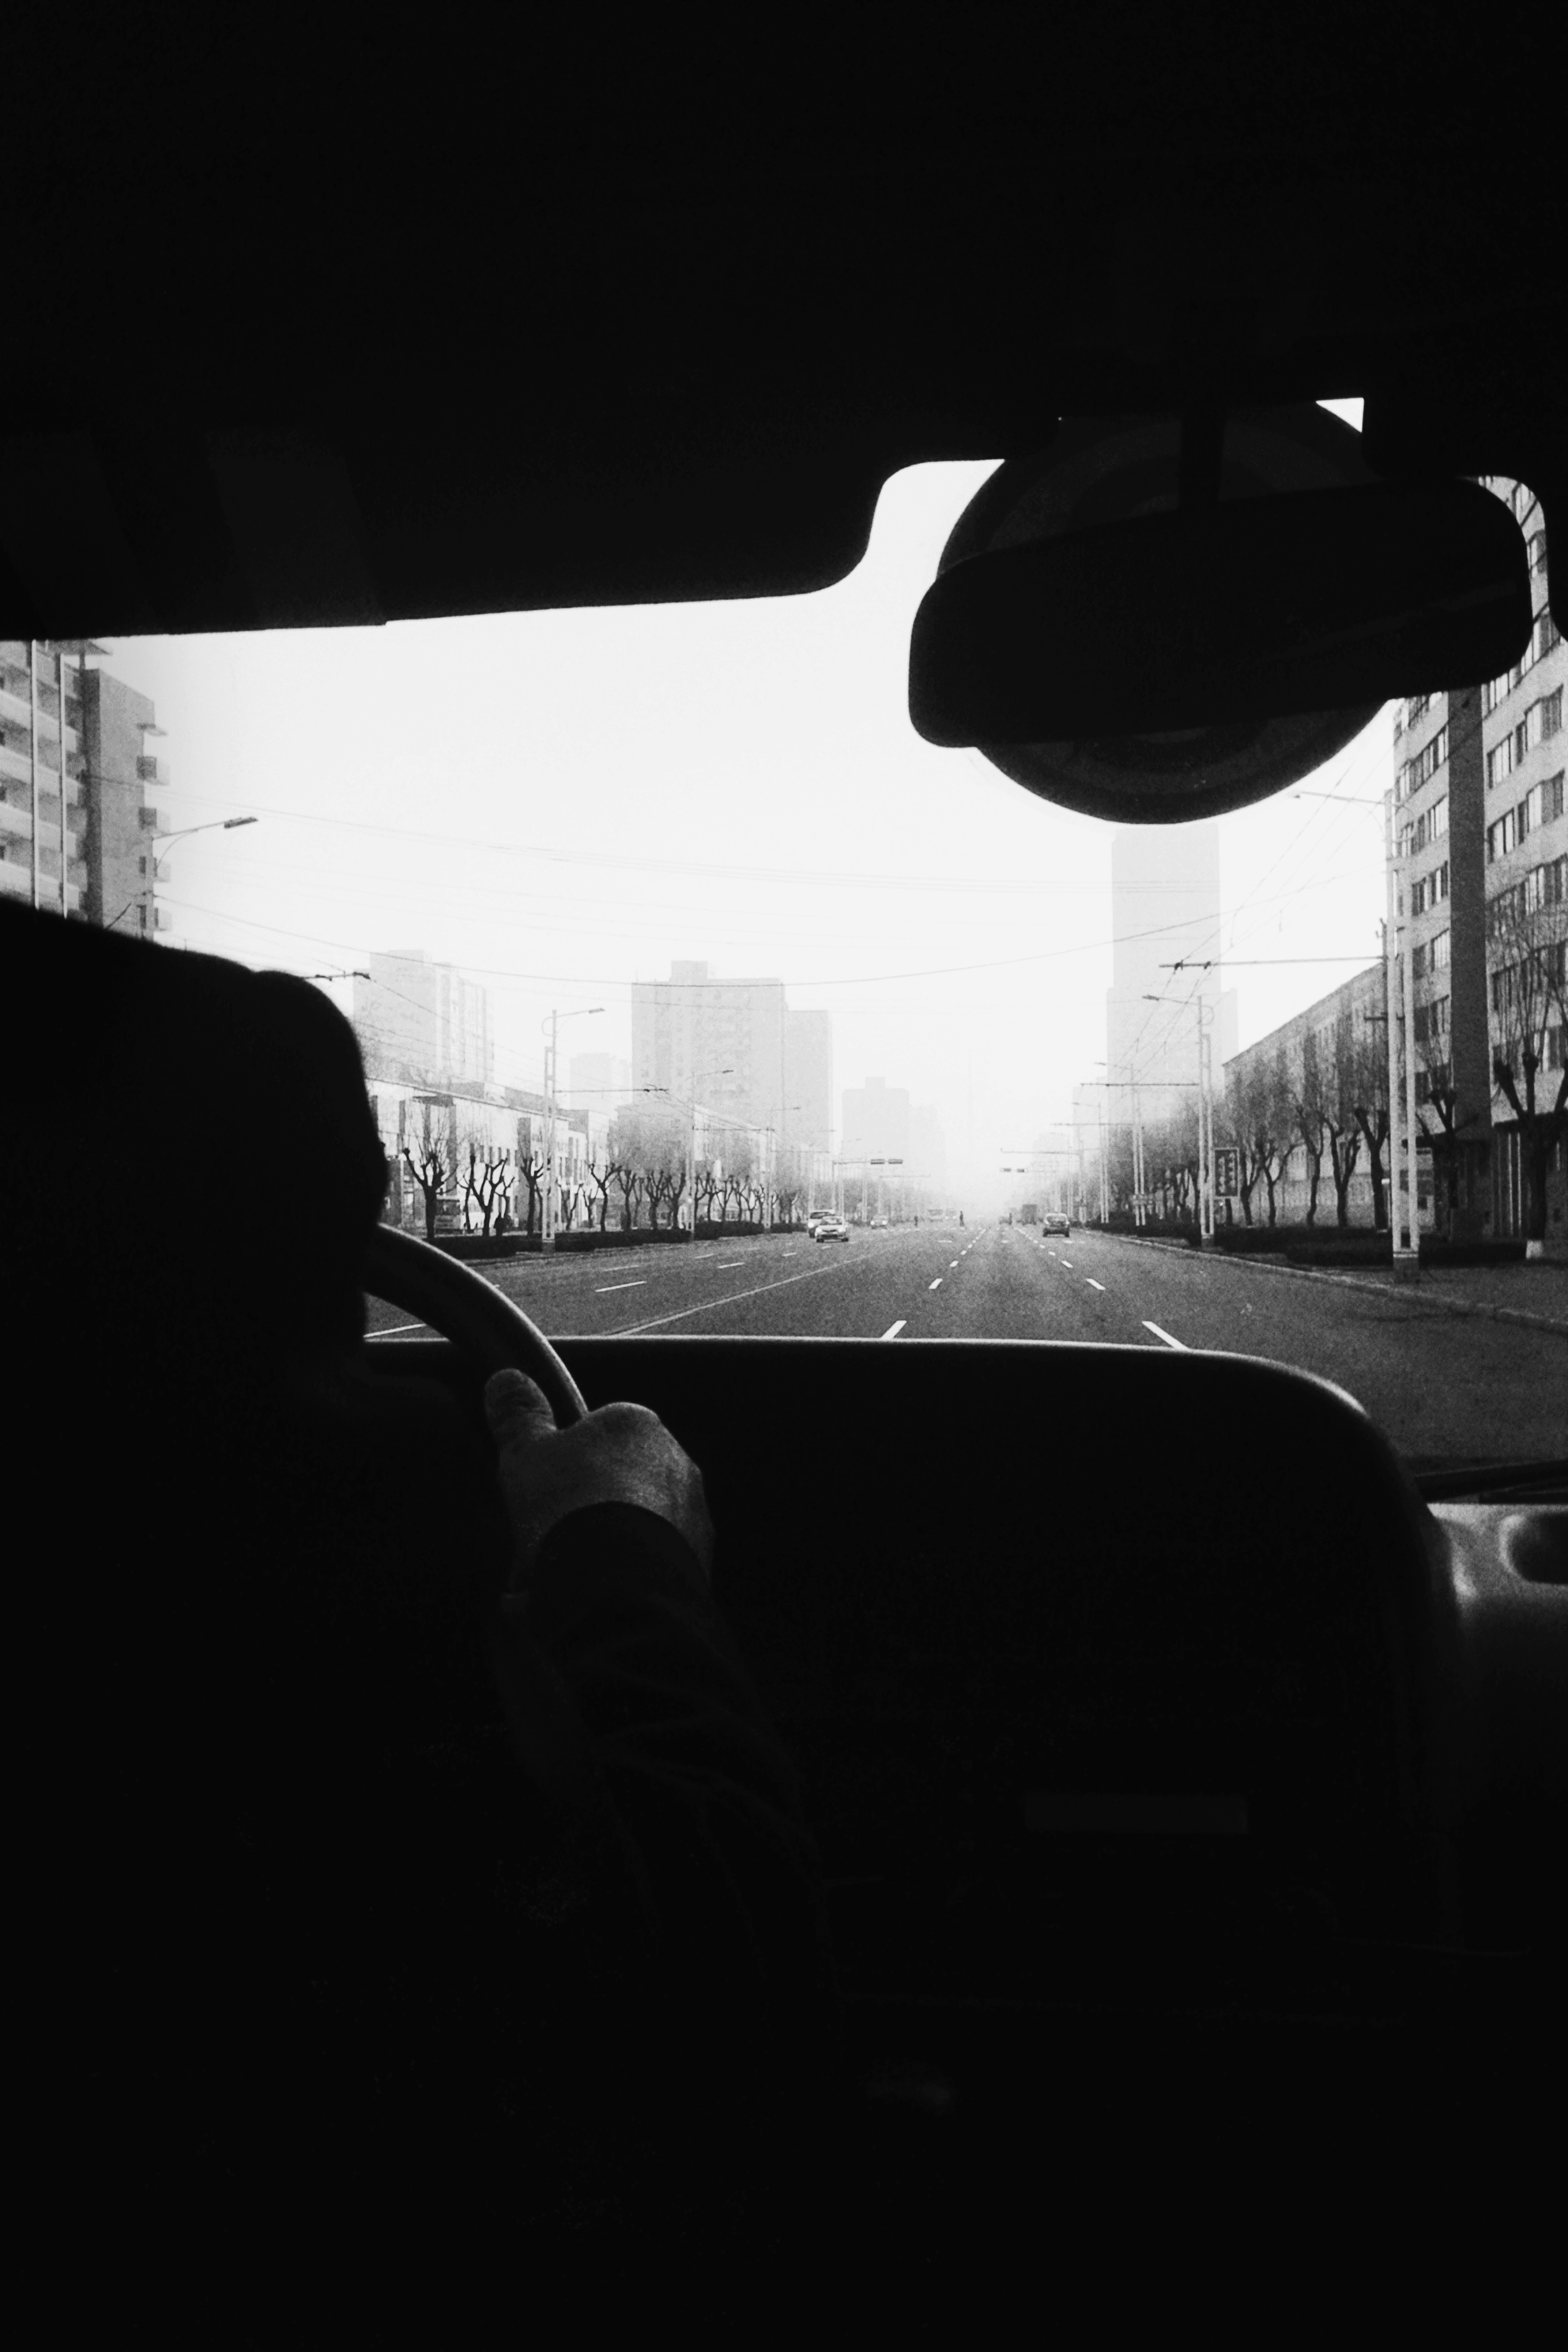 Black and white cities // Pyongyang